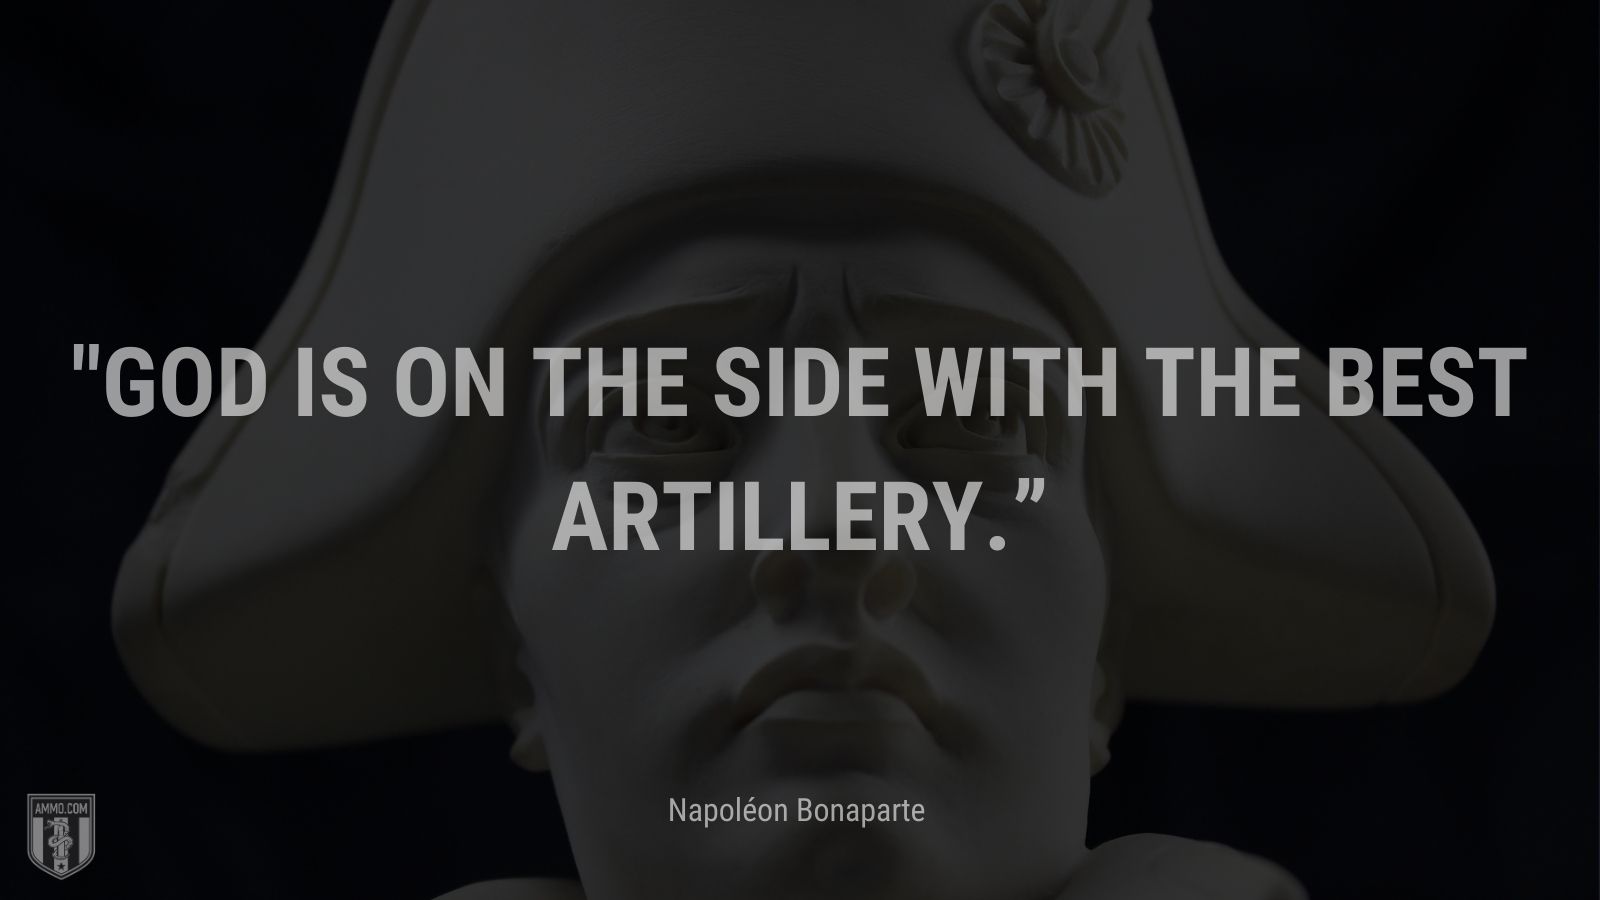 “God is on the side with the best artillery.” - Napoléon Bonaparte